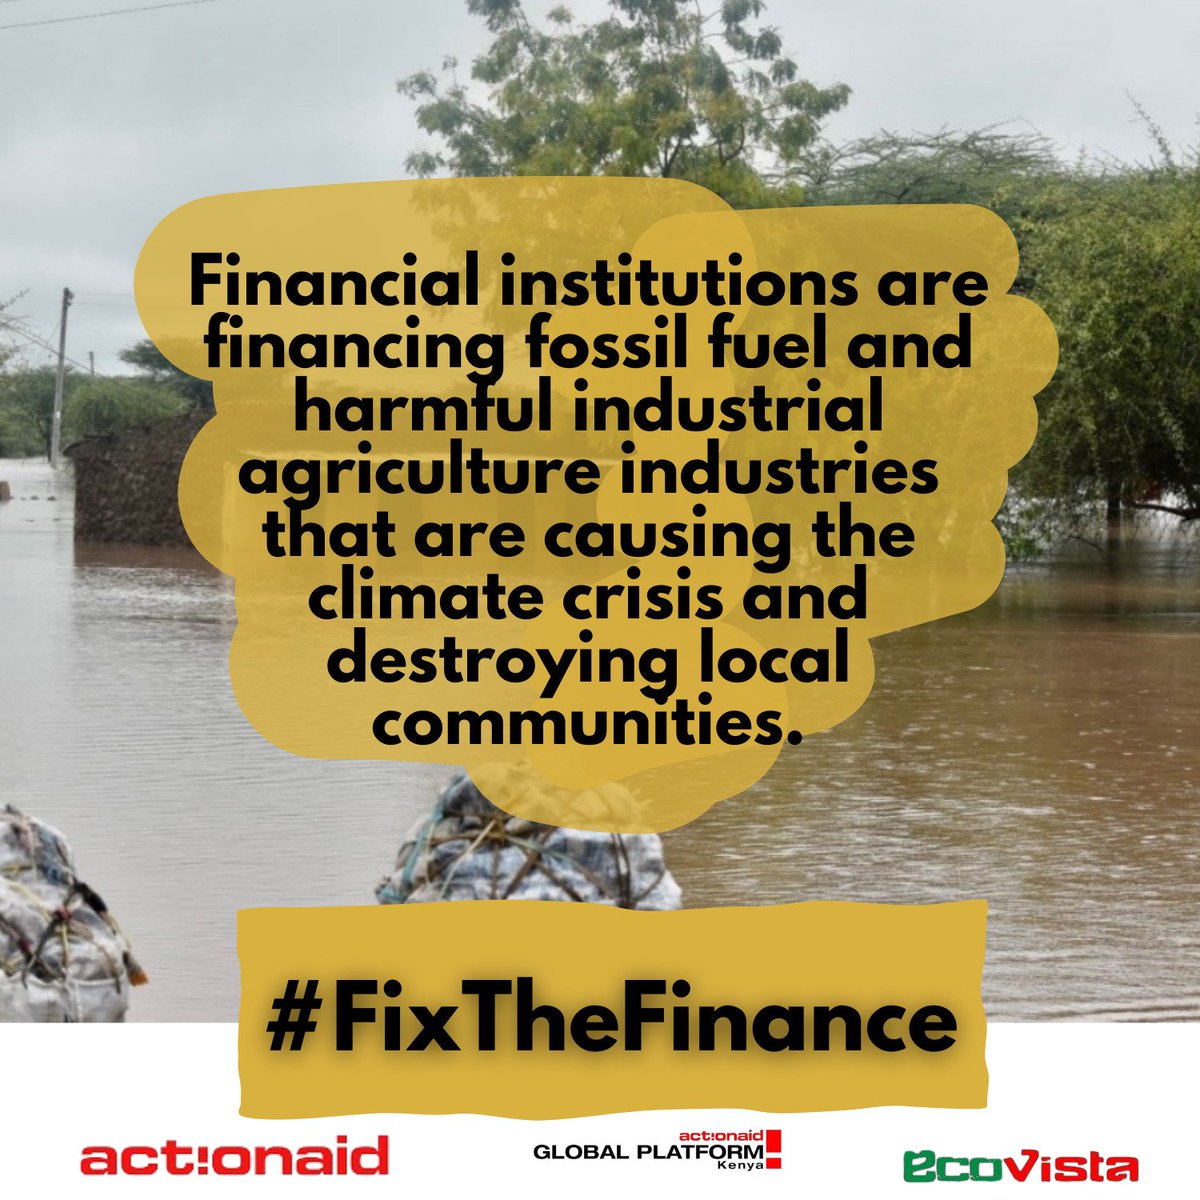 The IMF is called out for its climate-exacerbating debt practices. #ForPeopleForPlanet #FixTheFinance Fund Our Future @ActionAid @ActionAid_Kenya @GP_Kenya